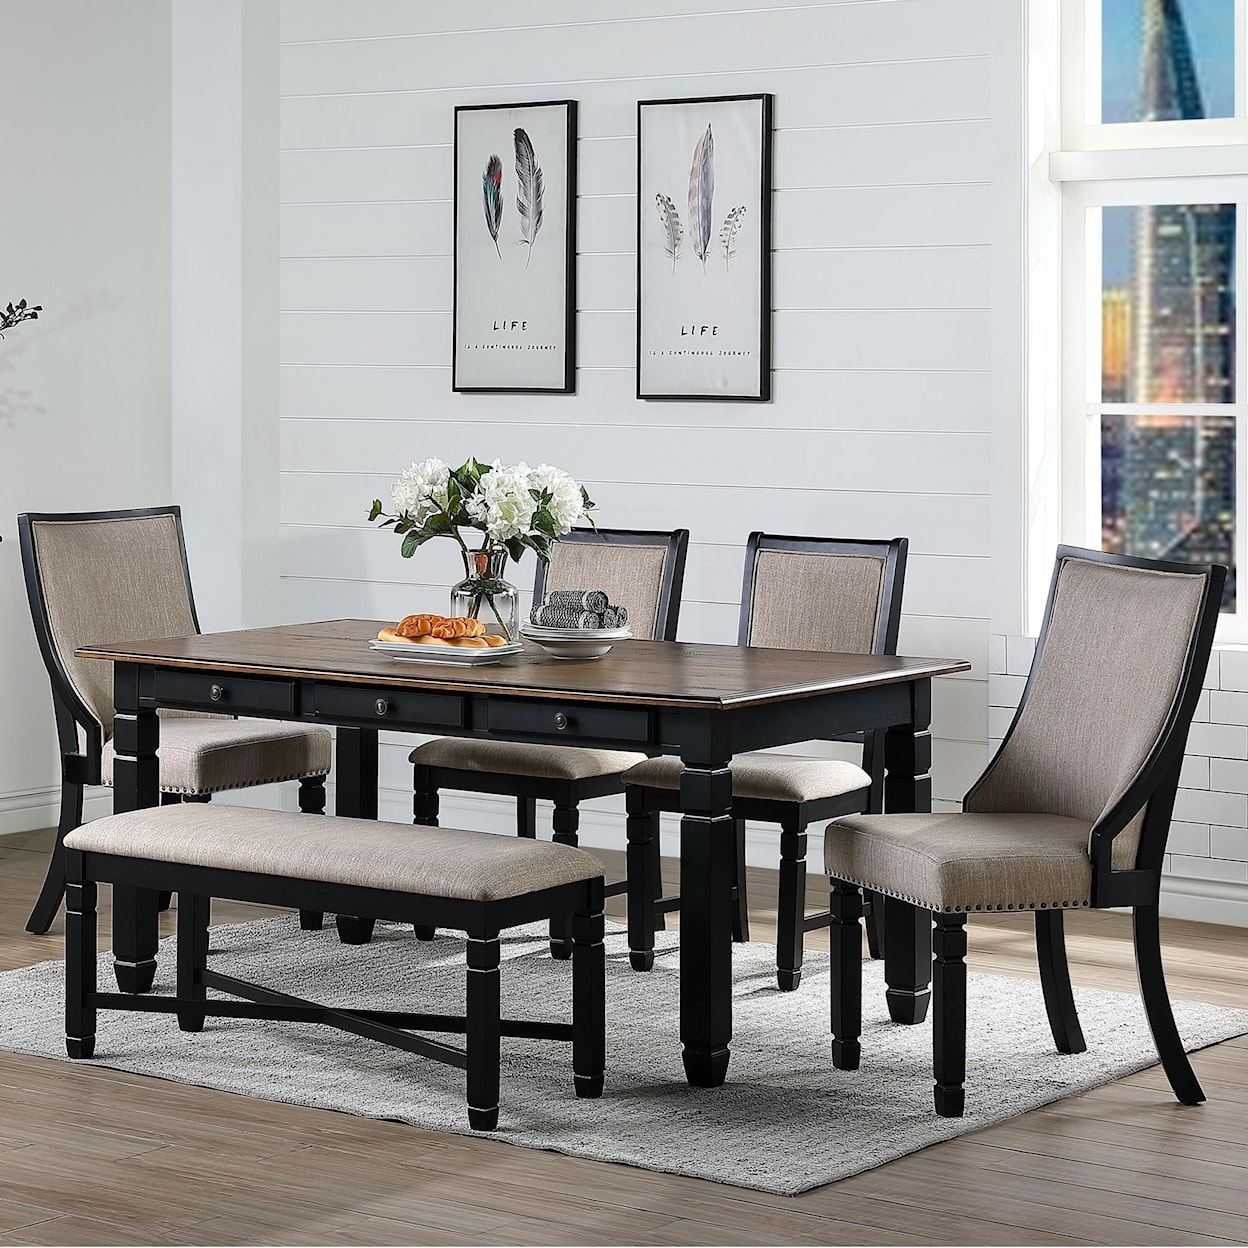 New Classic Prairie Point Table & Chair Set with Bench